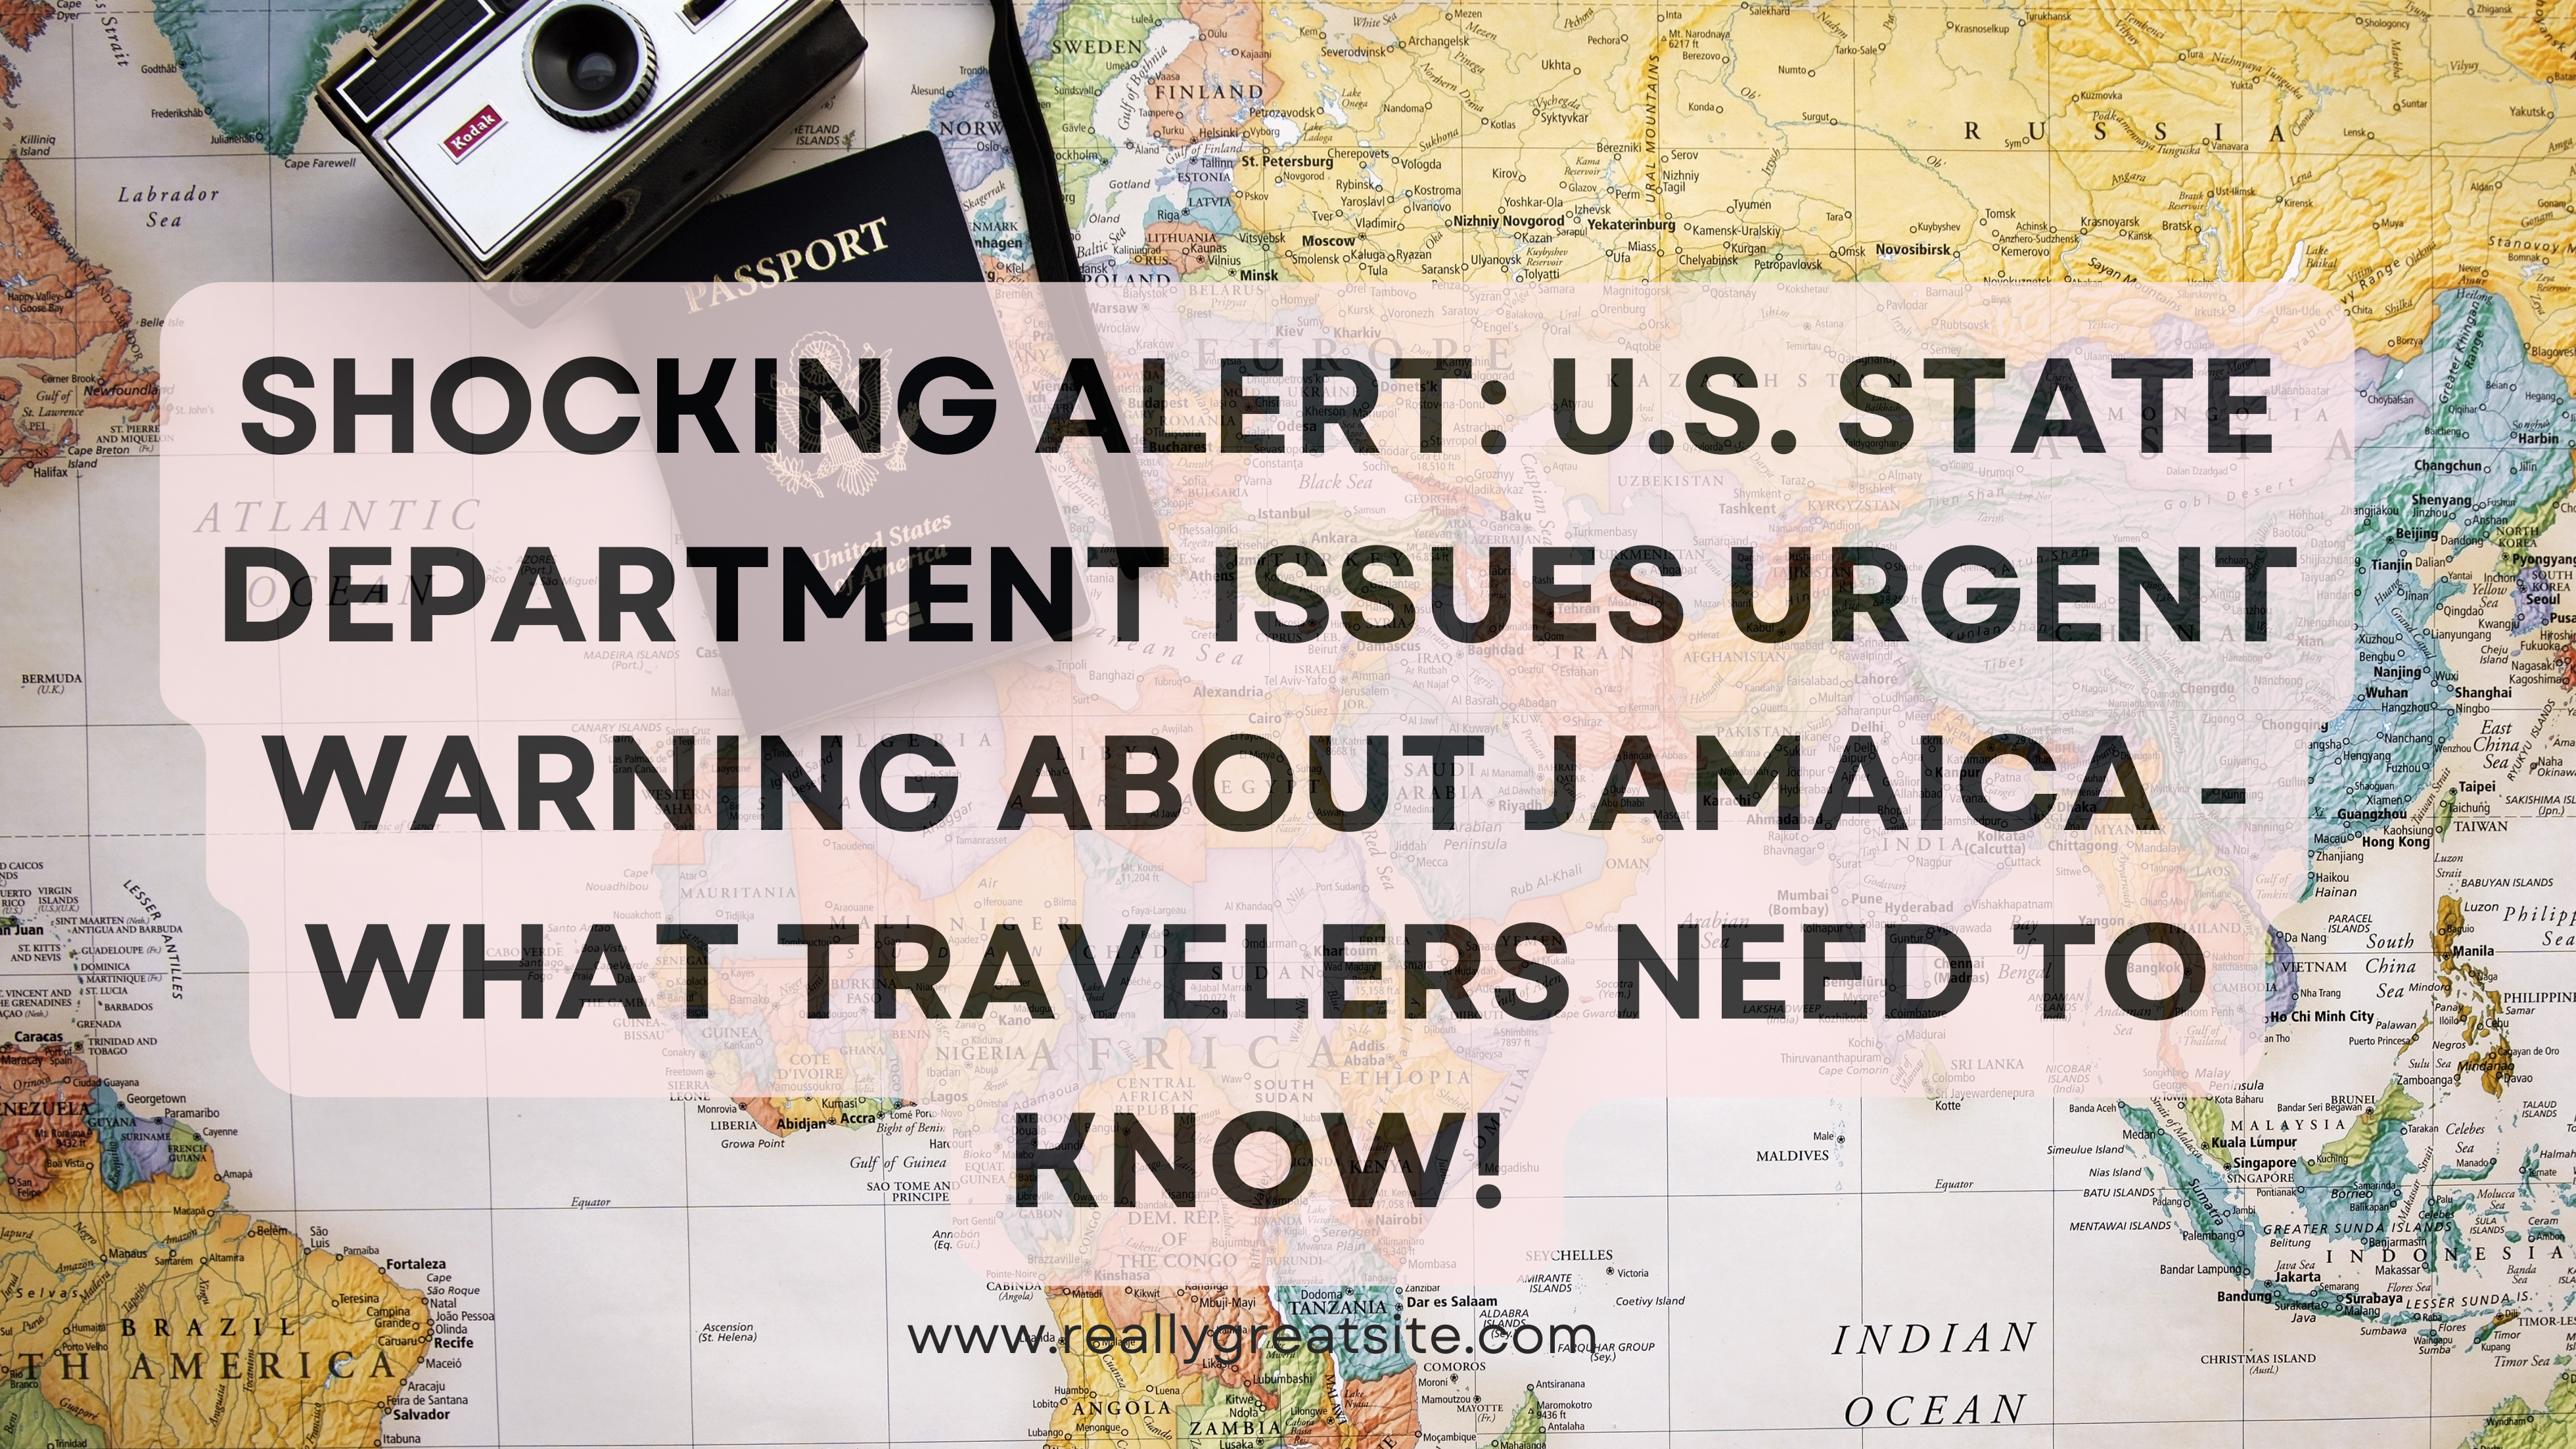 Shocking Alert: U.S. State Department Issues Urgent Warning About Jamaica - What Travelers Need to Know!